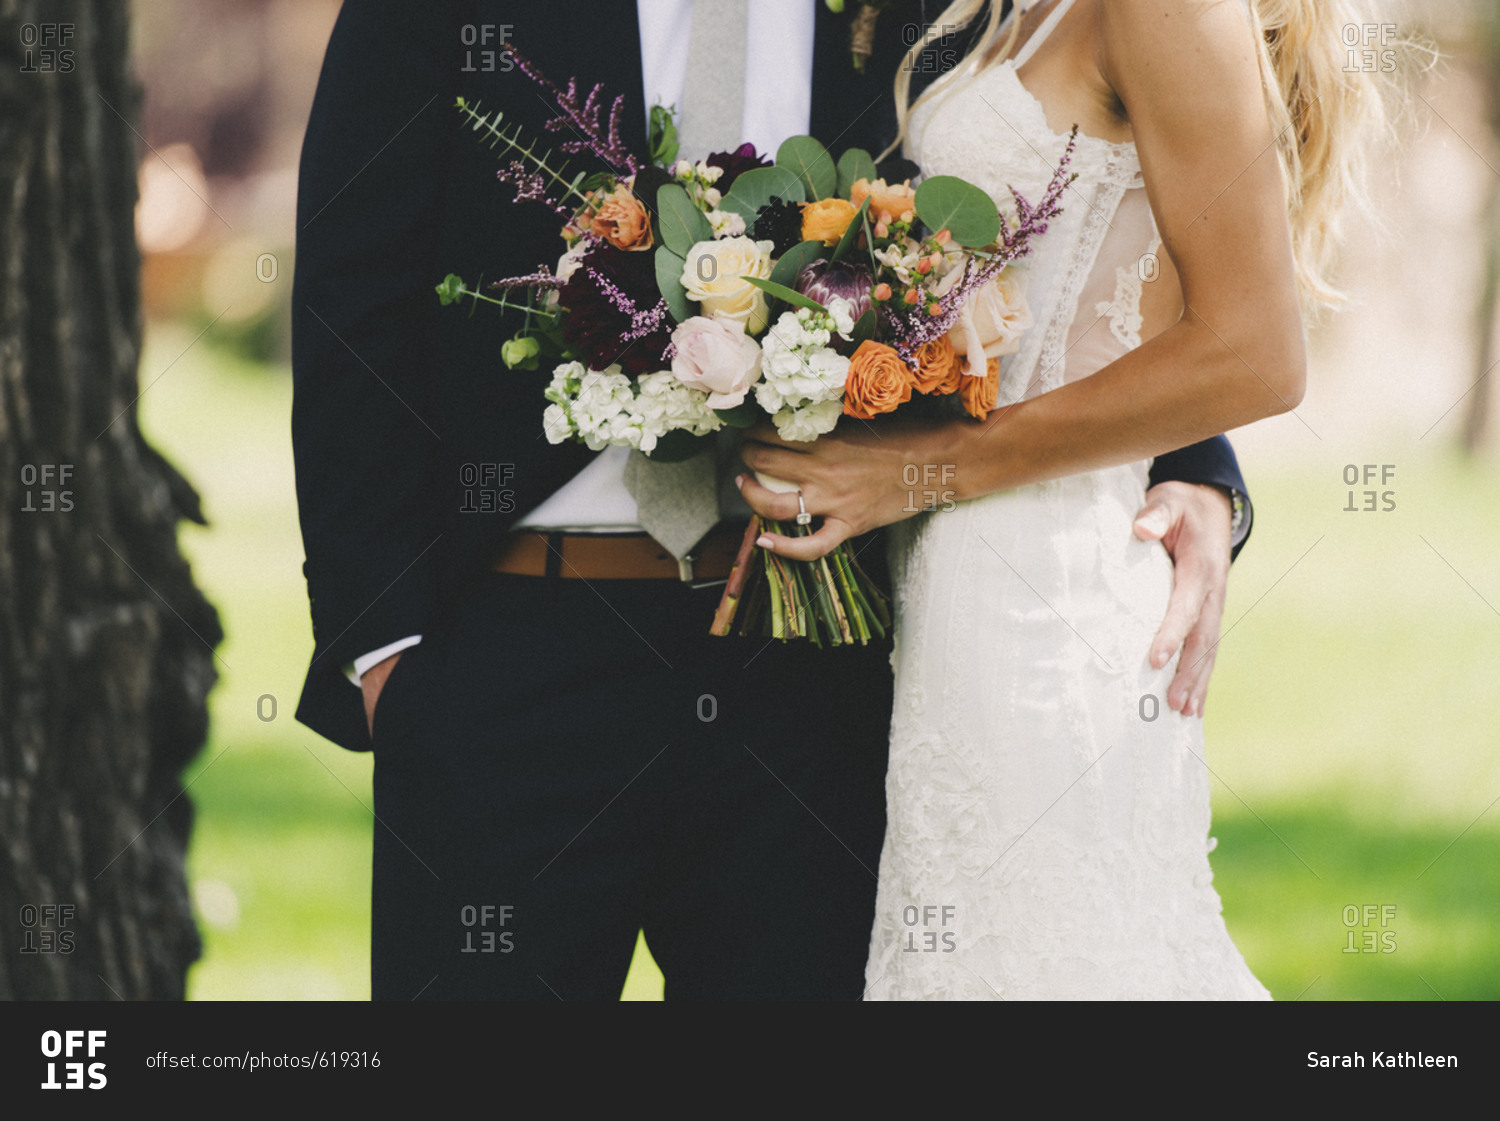 Mid-section portrait of bride and groom standing together with colorful bouquet